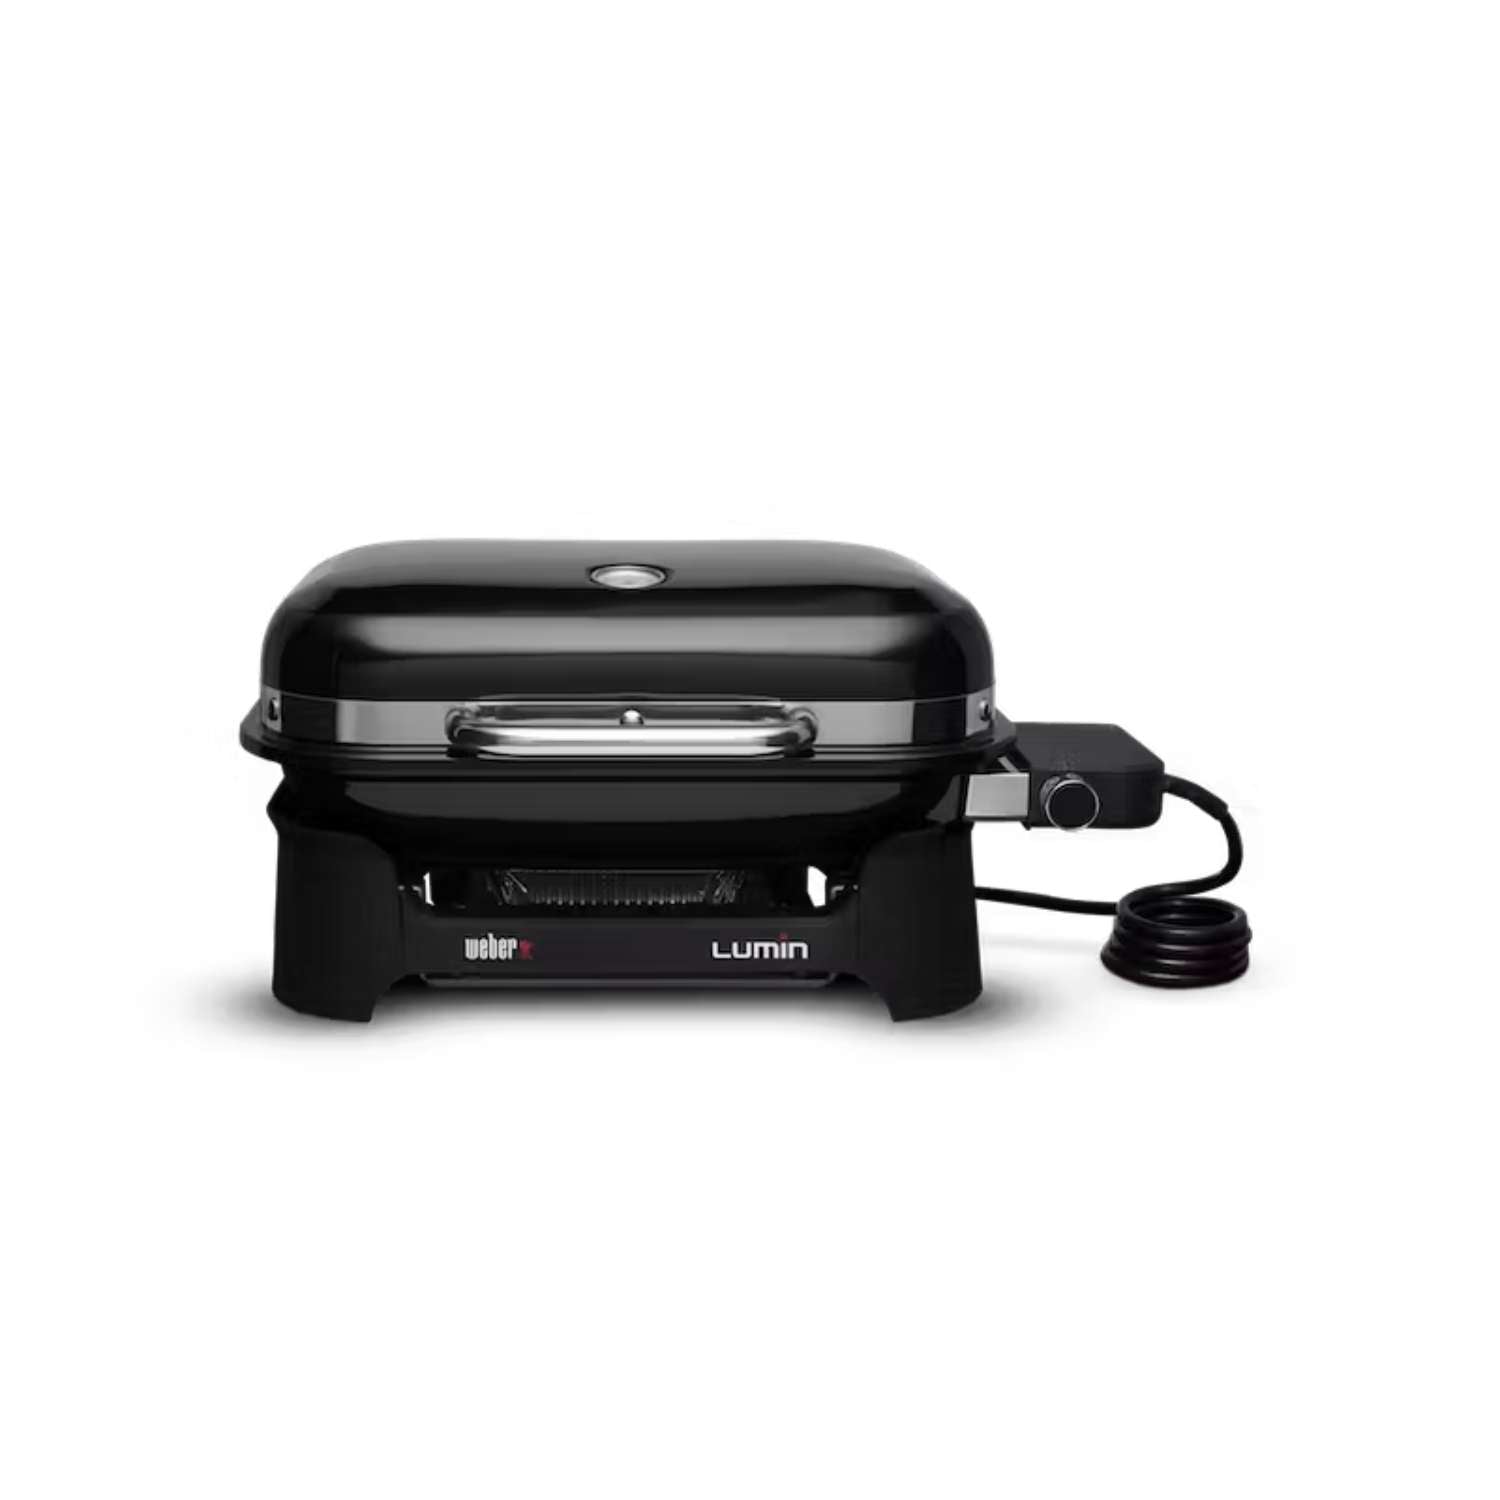 Weber Lumin Compact Grill perfect for outdoor barbecues available at MeatKing.hk8